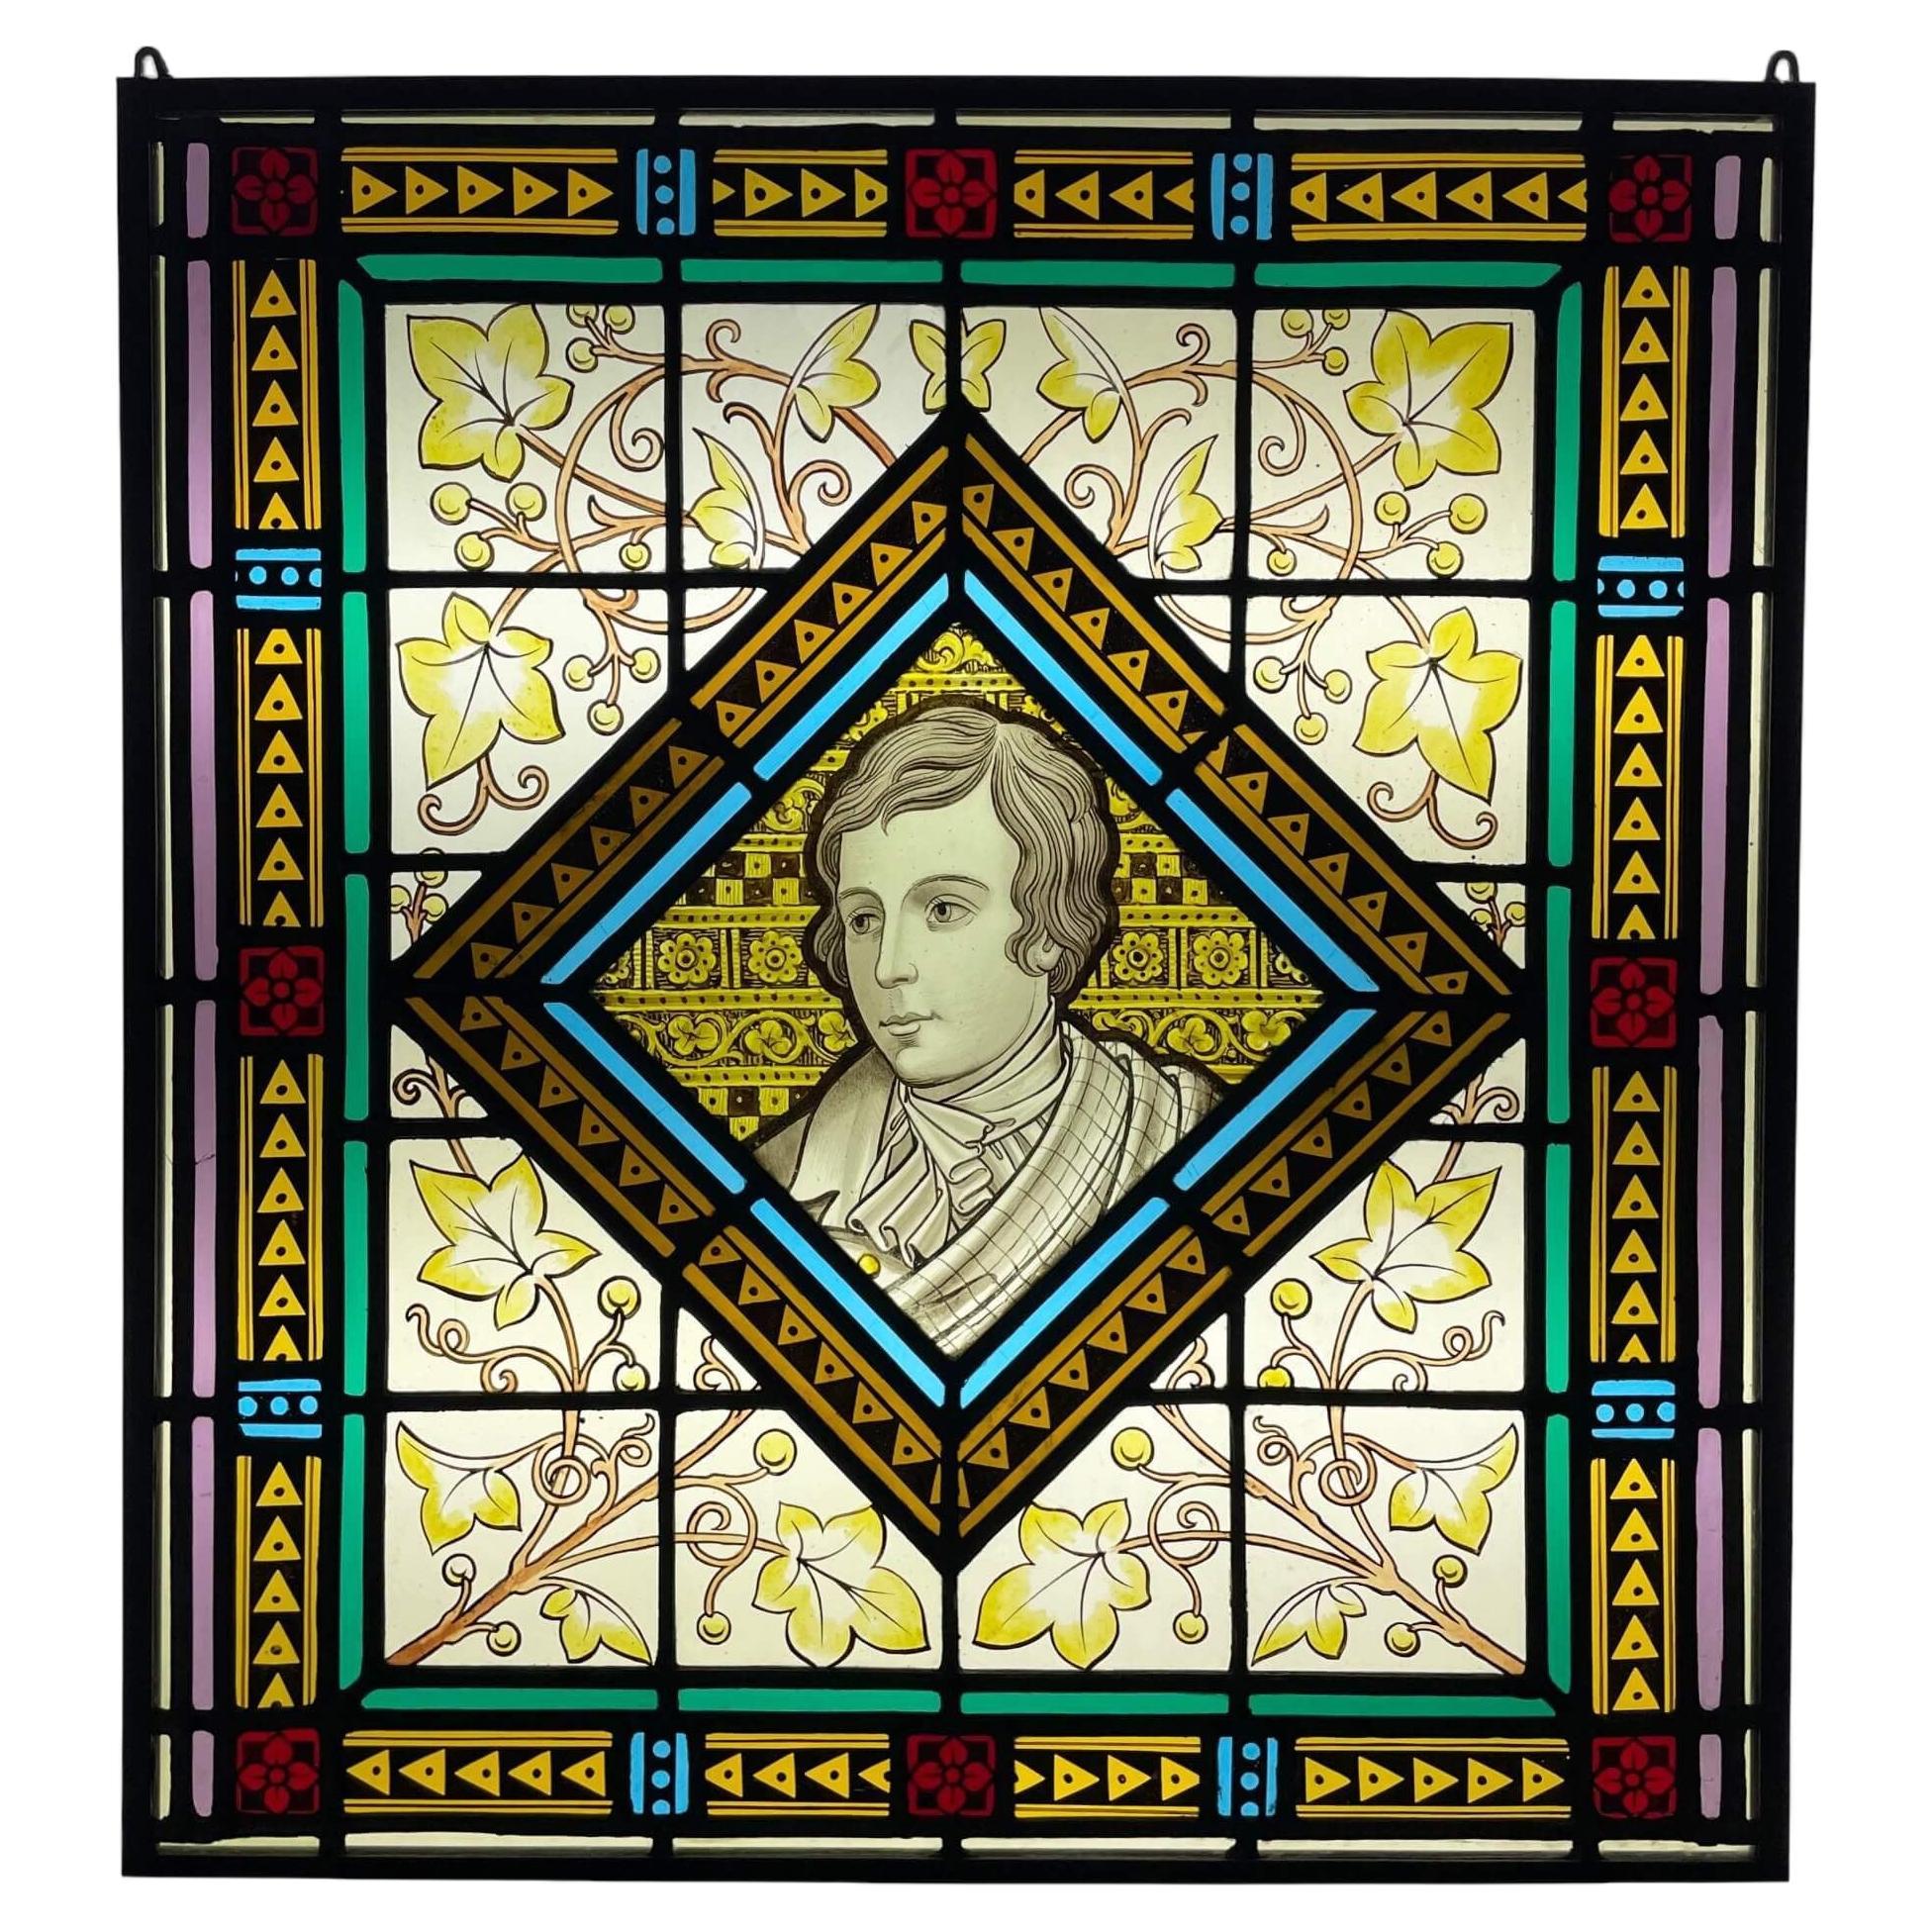 Robert Burns Antique Stained Glass Window